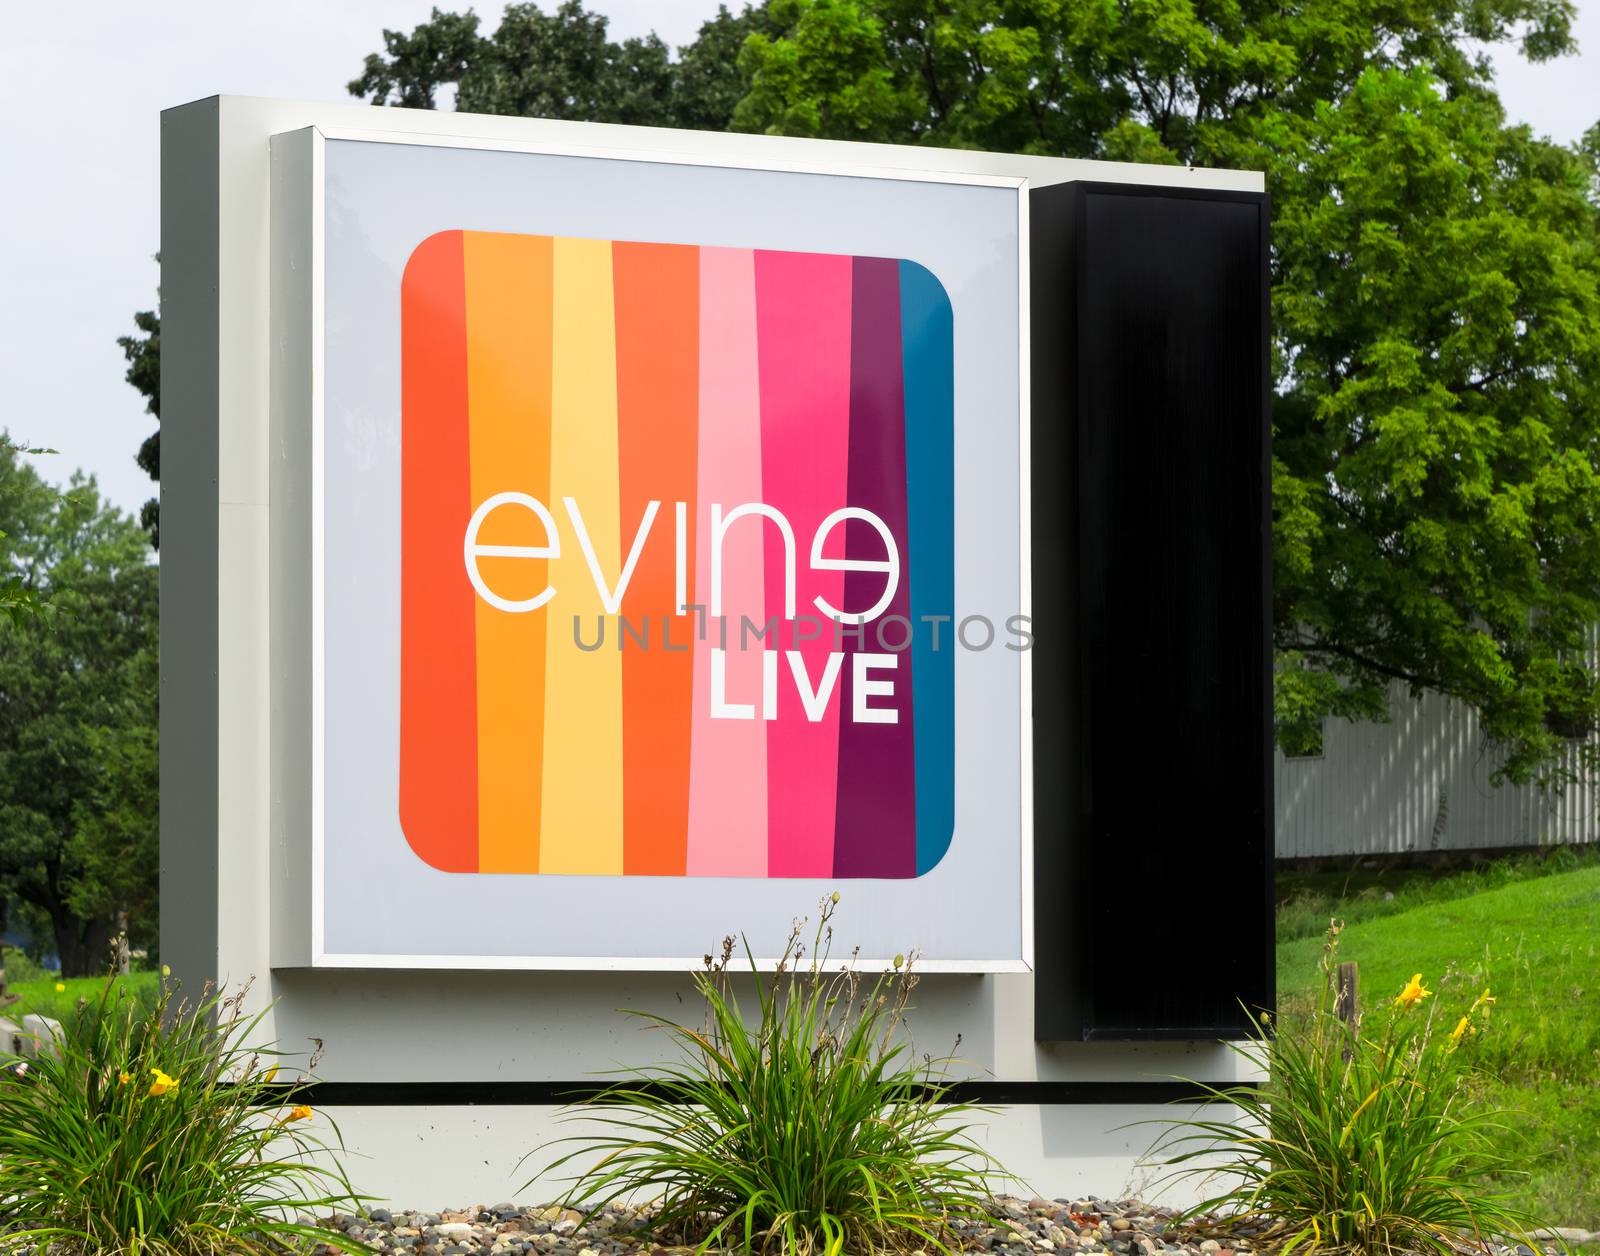 EDEN PRAIRIE, MN/USA - August 13, 2015: Evine Live corporate headquarters and sign. Evine Live is a cable, satellite and broadcast television shopping network.